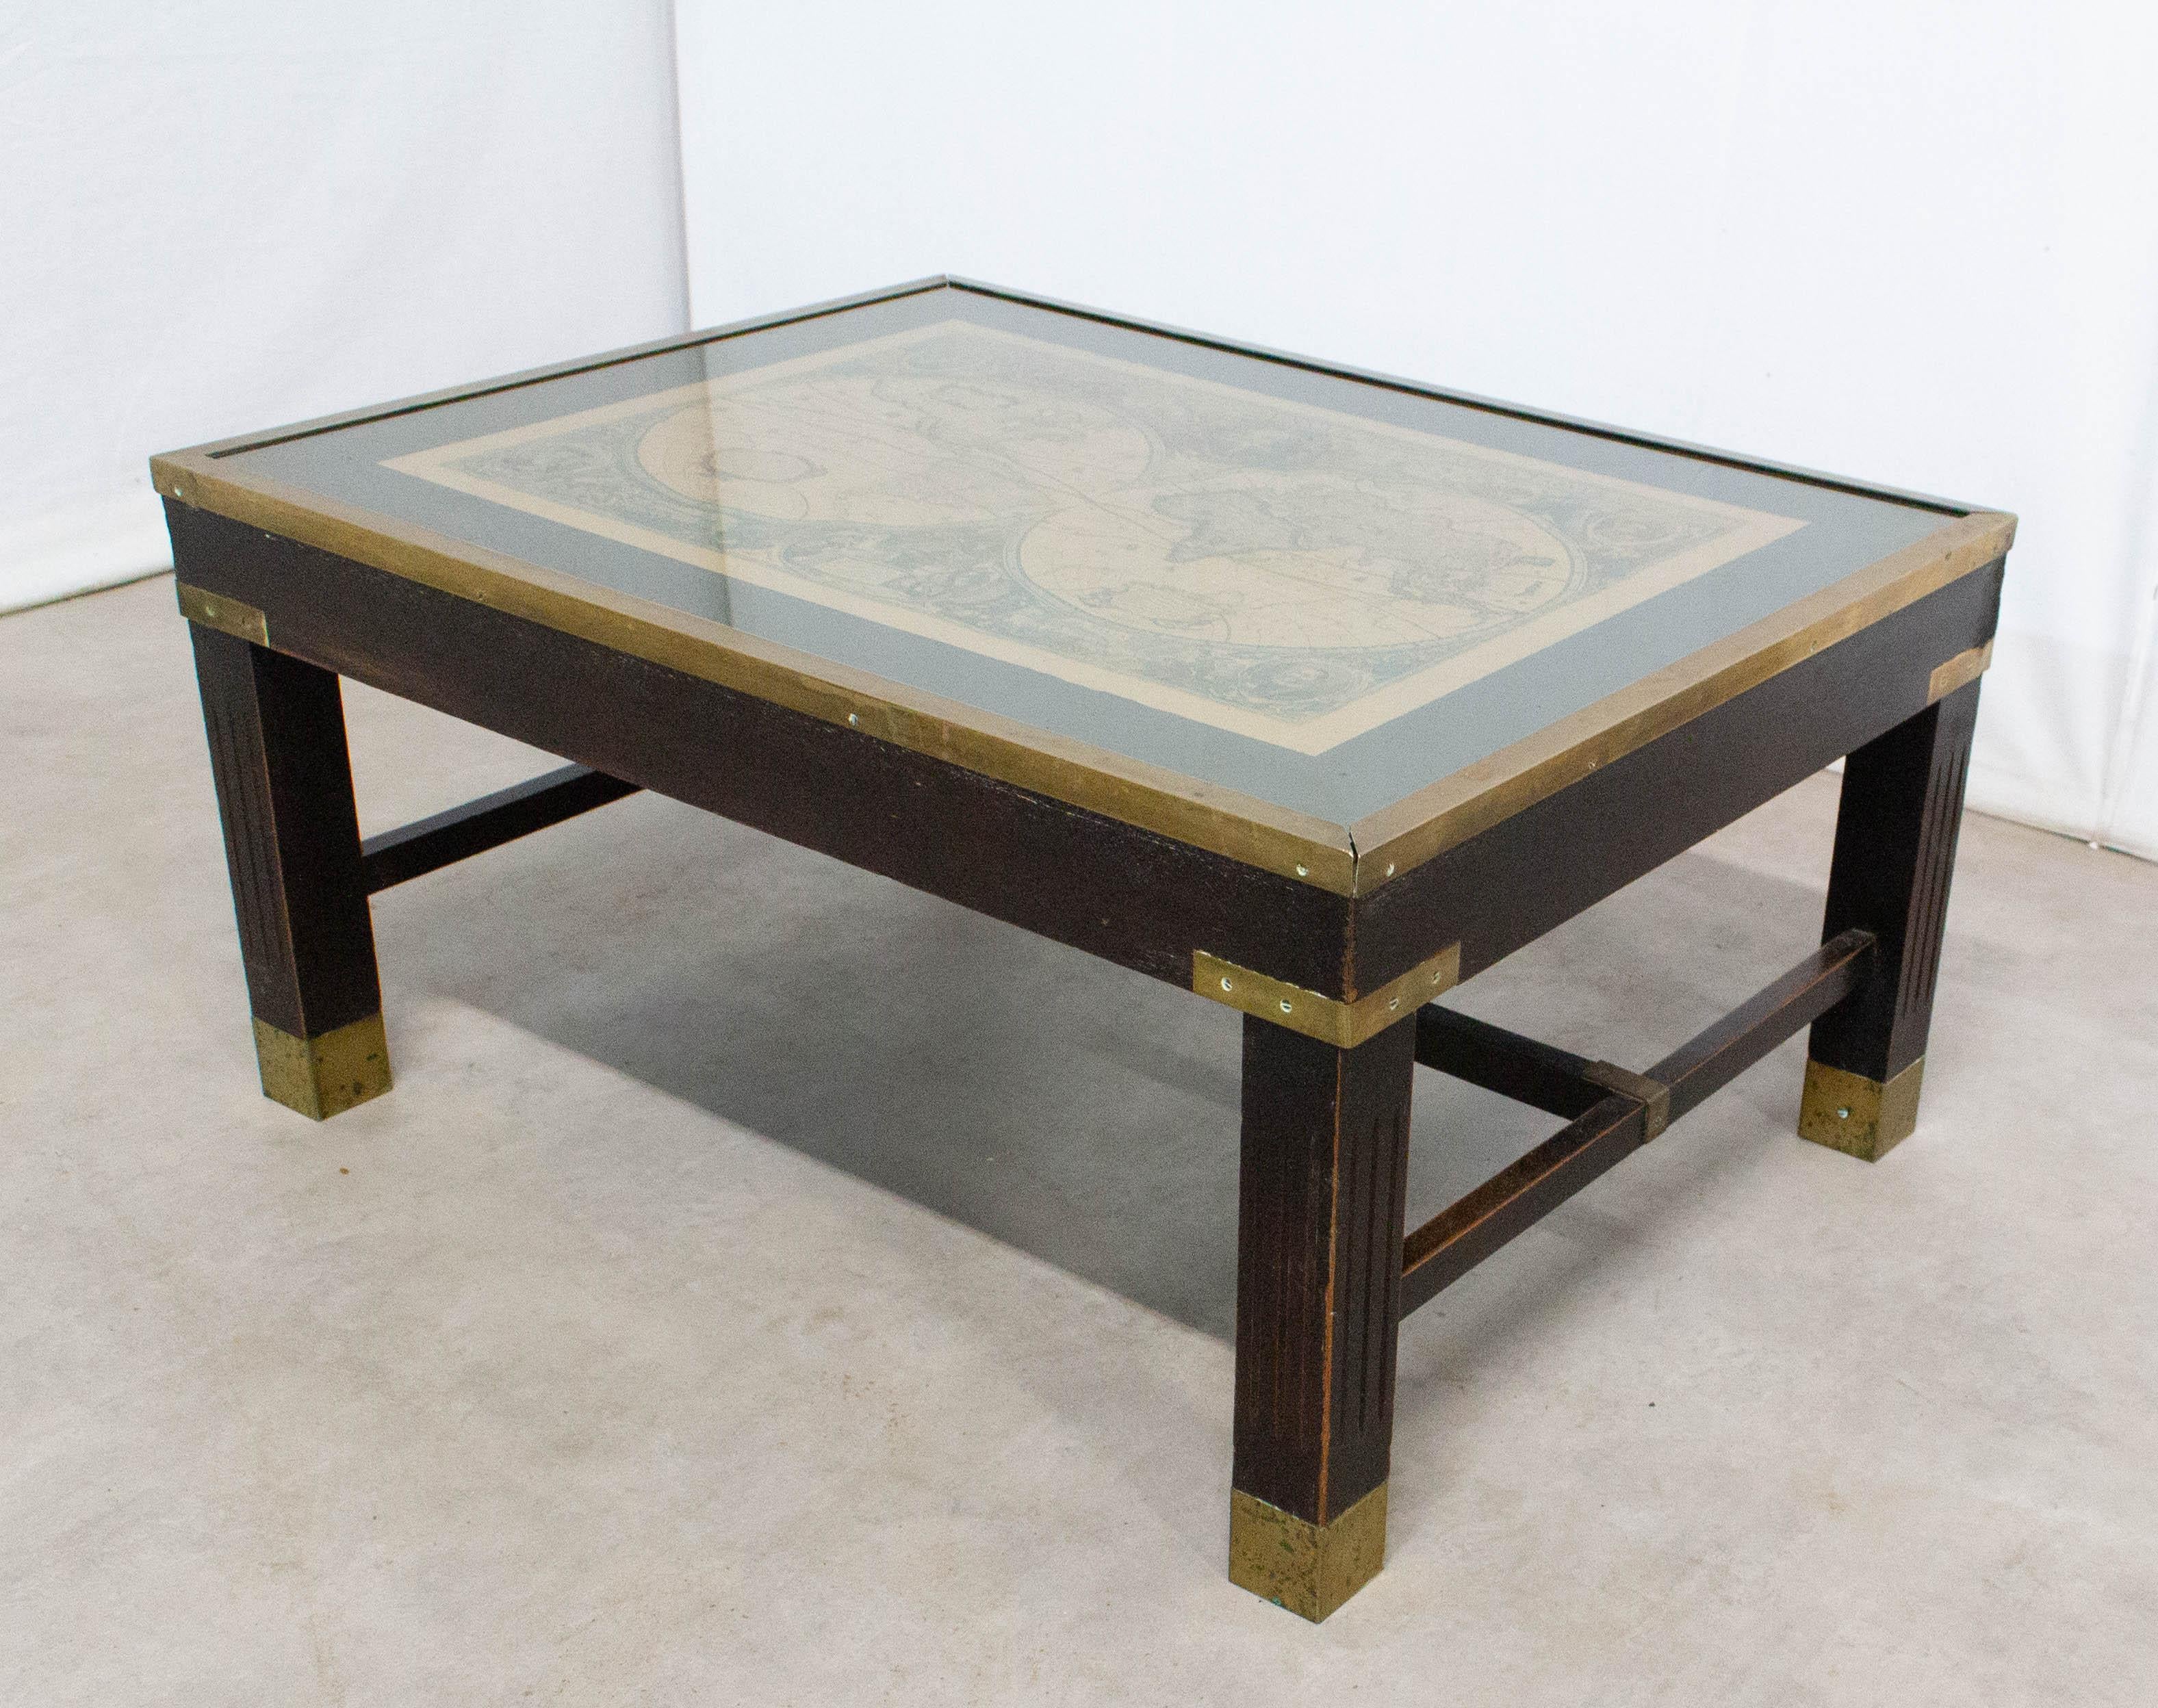 Coffee table with a late 19th century card under glass on the top
circa 1960

For shipping: W 77xD 59x H37cm 15kg.